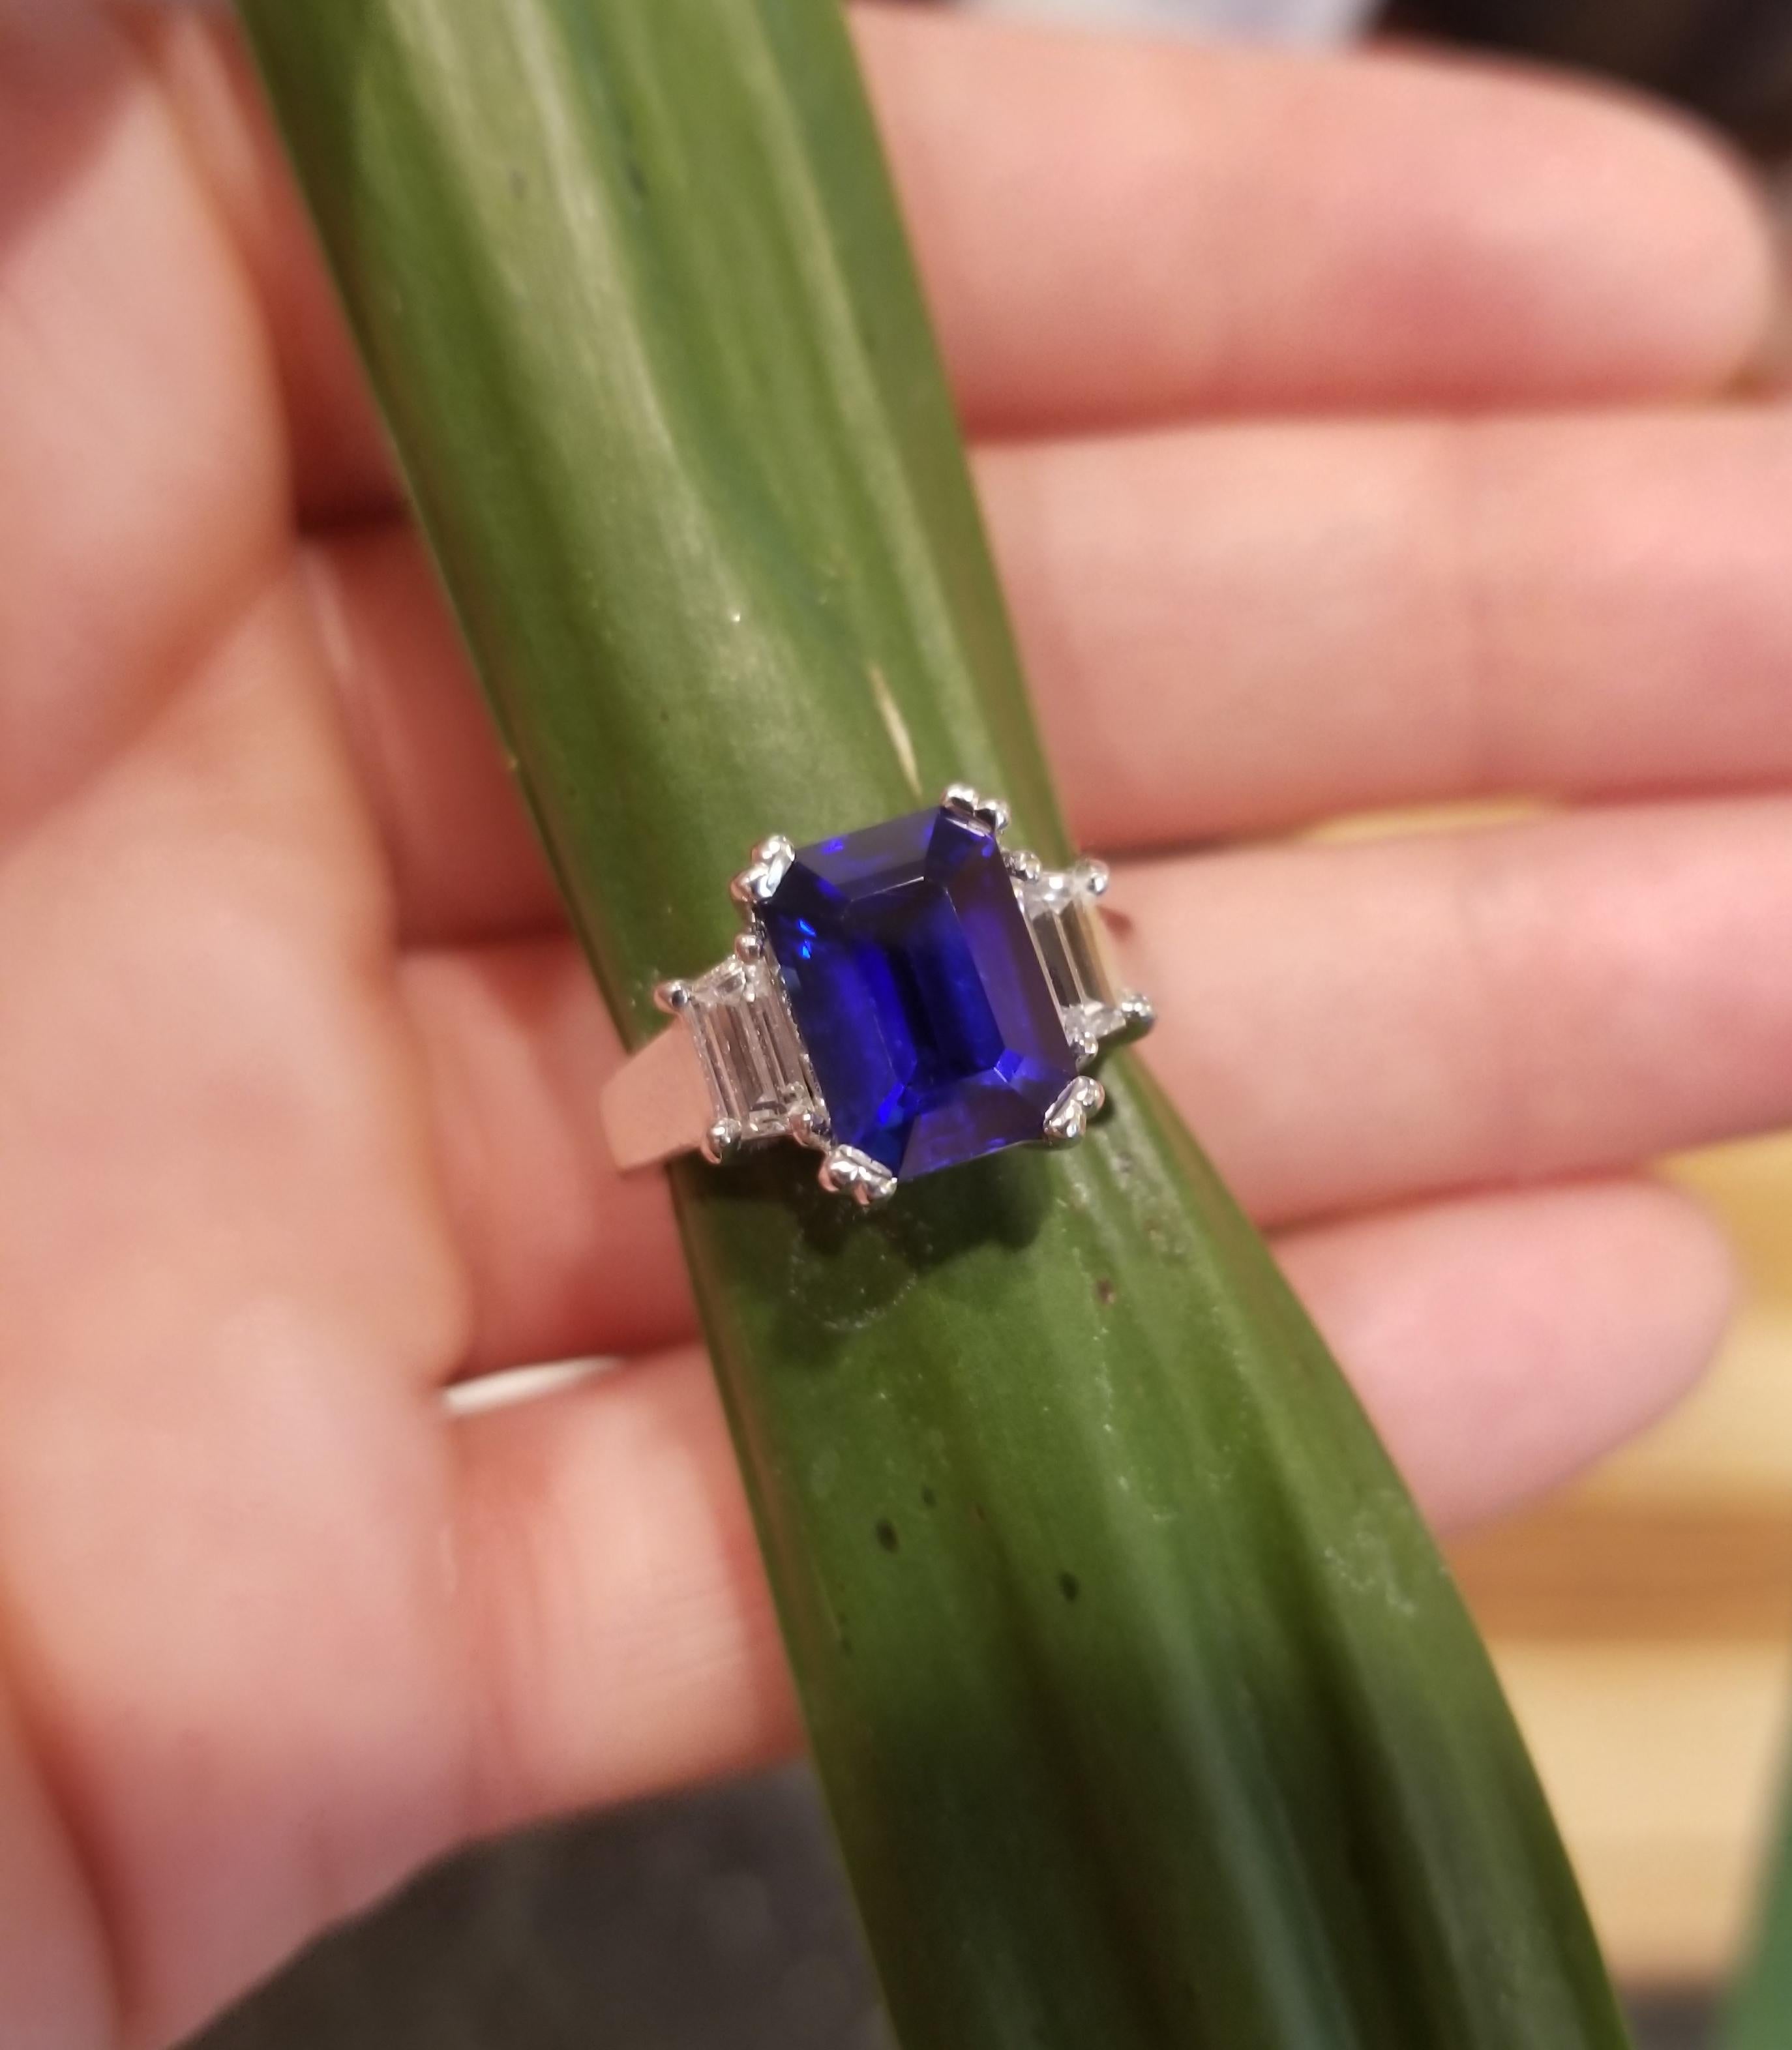 This luxuriously rich and vivid Royal Blue sapphire is as eye-catching as it gets. The color is intense and dramatic, and the exquisite quality of the cut helps to maximize the brightness of the stone. The 3.67ct octagonal shape is absolutely